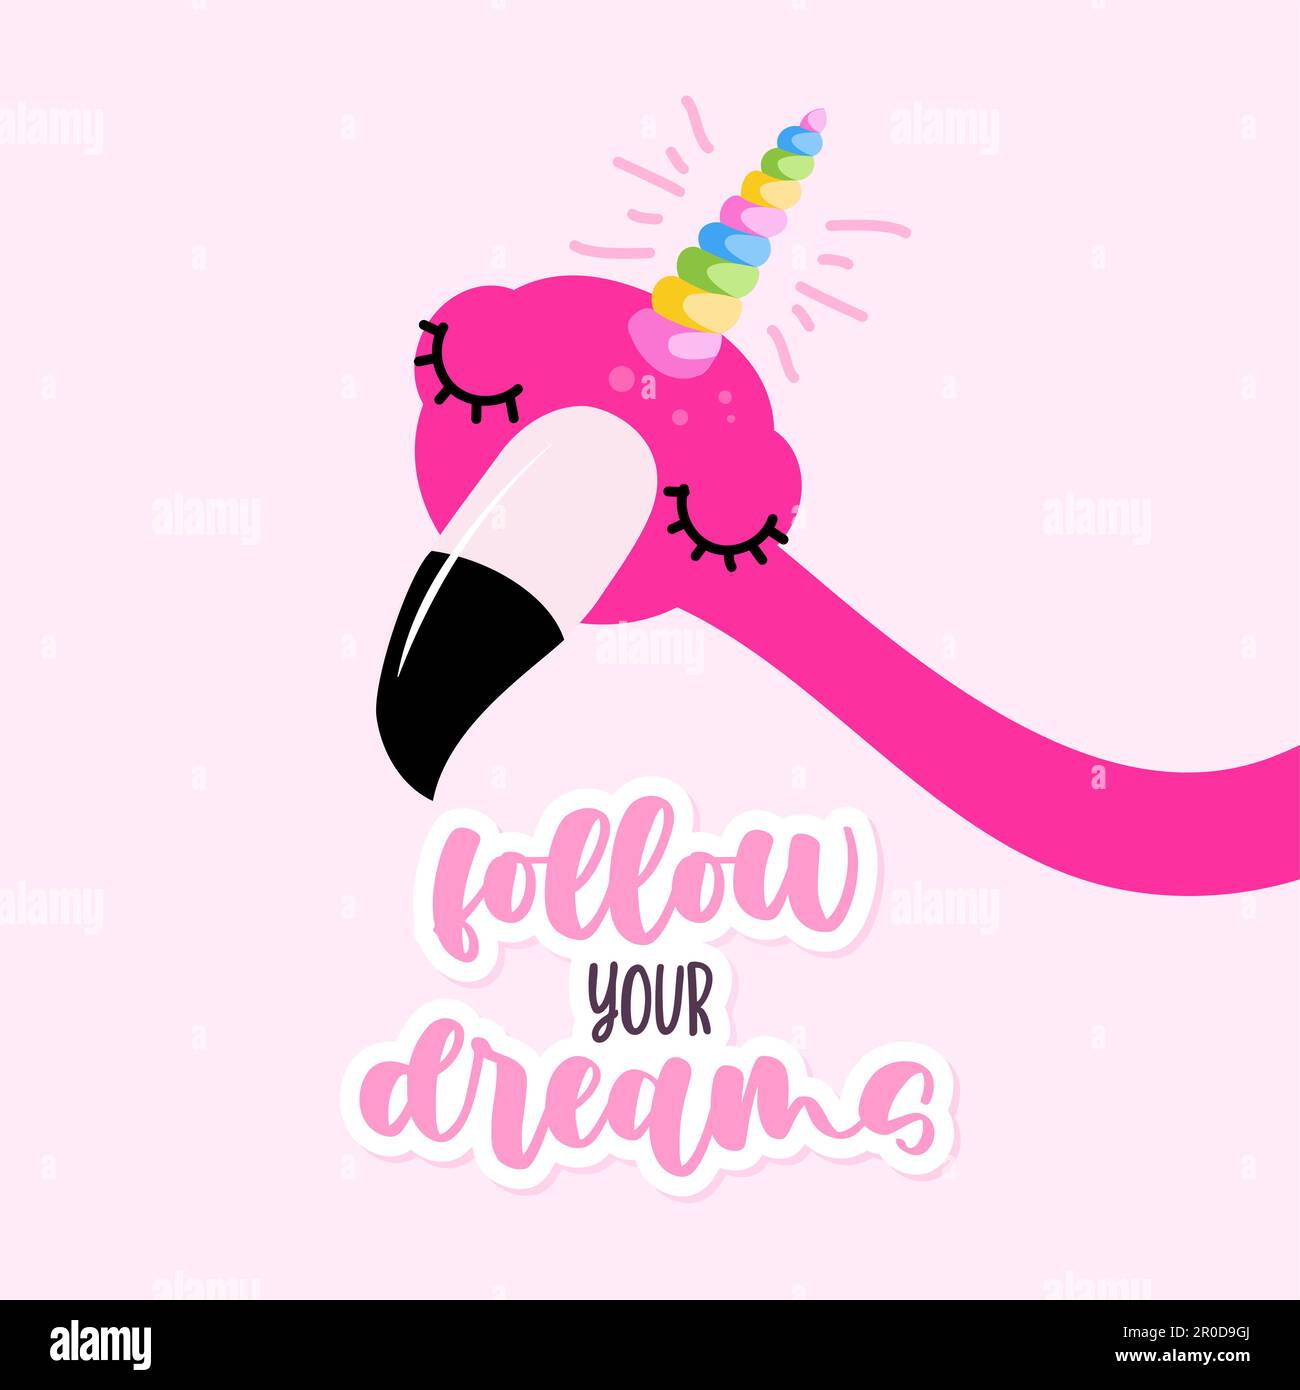 Follow your dreams - Motivational quote. Hand painted brush lettering with flamingo. Good for t-shirt, posters, textiles, gifts, travel sets. Stock Vector